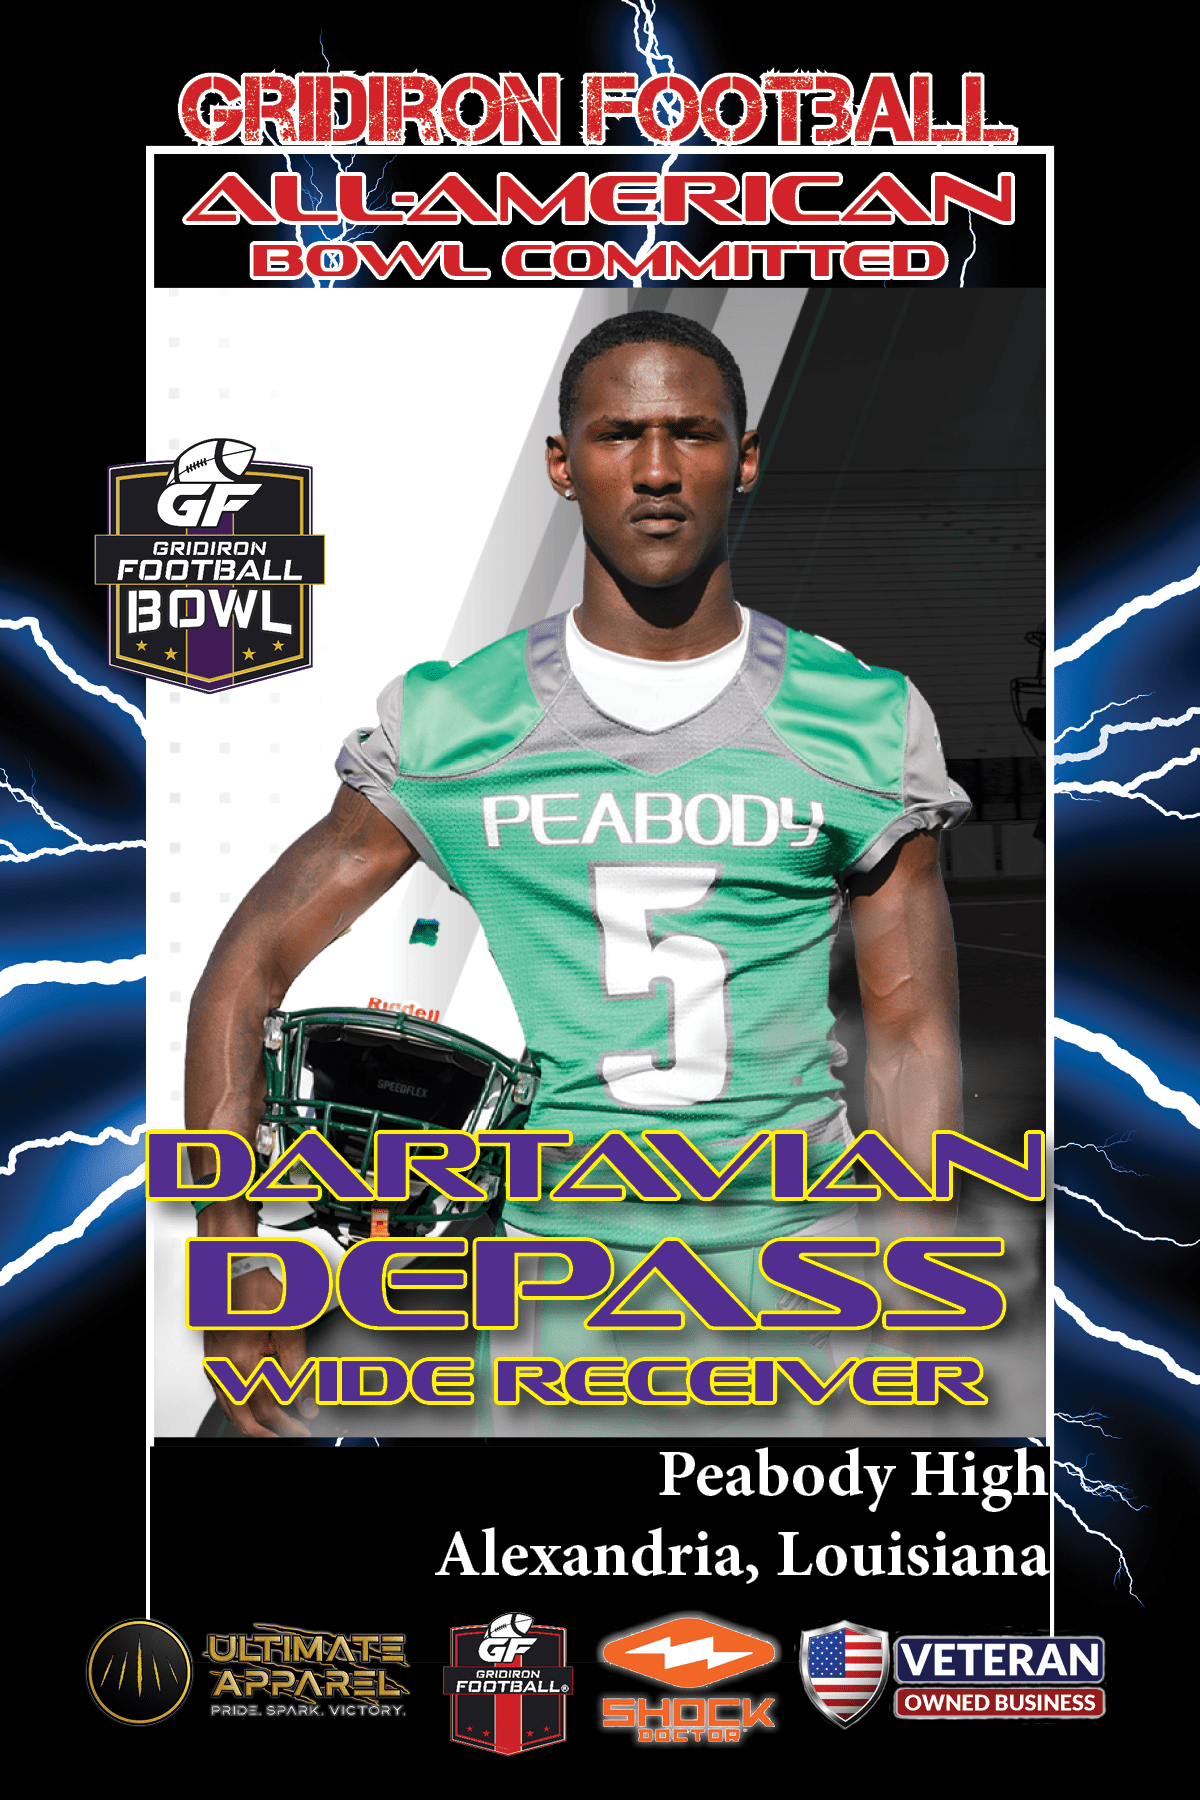 BREAKING NEWS: Peabody High School (Alexandria, LA.) WR Dartavian Depass has committed to the Gridiron Football All-American Bowl!